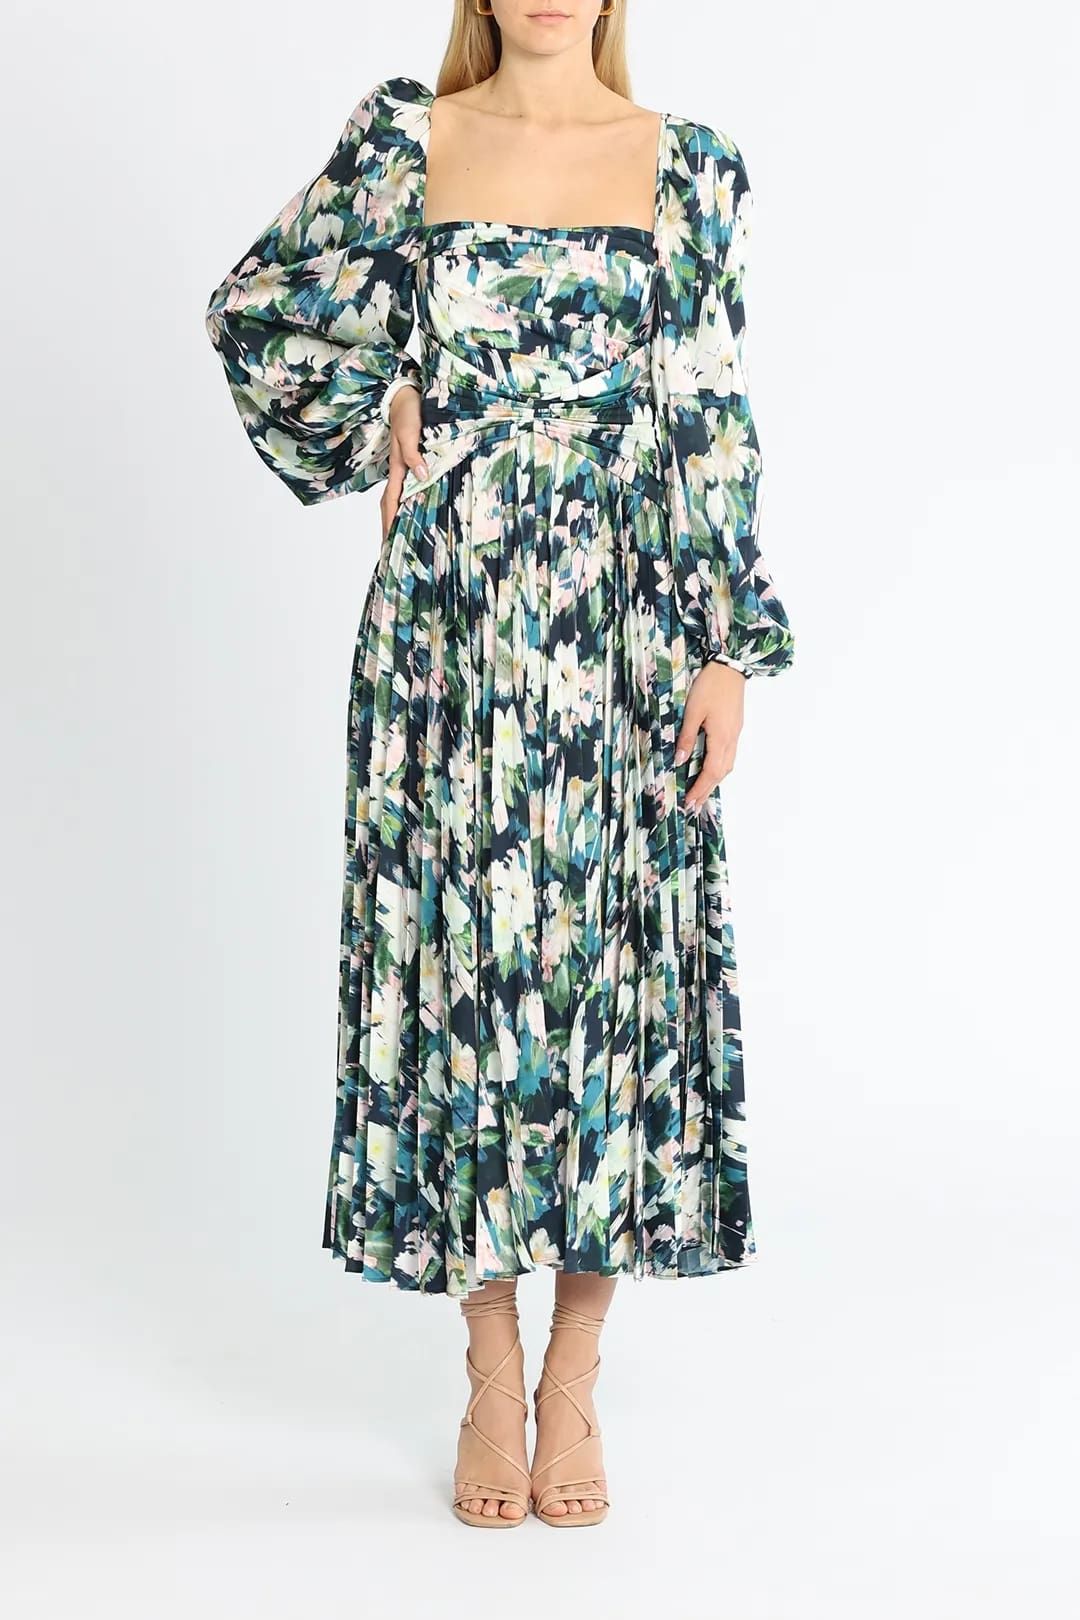 Hire Mattison dress in navy posey for wedding guests.